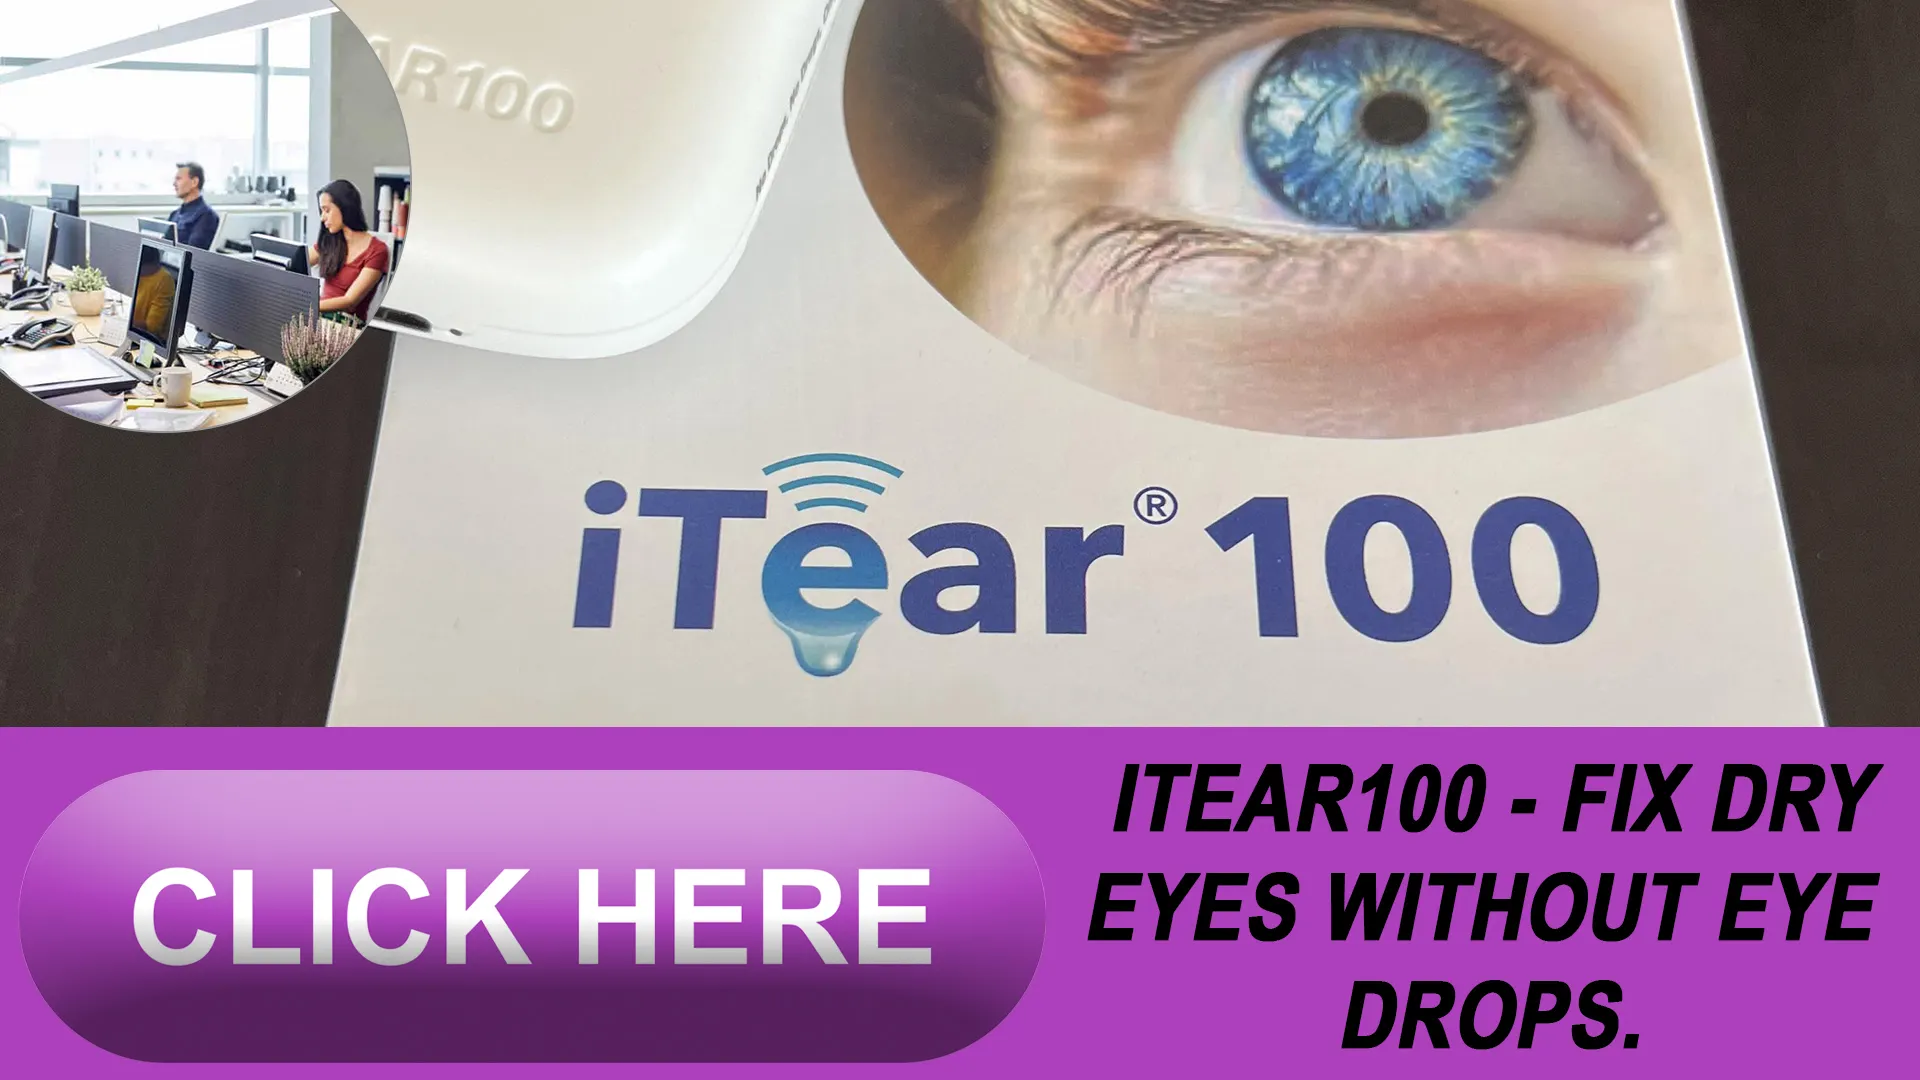 Discover the Benefits of the iTEAR100 Device for Eye Comfort